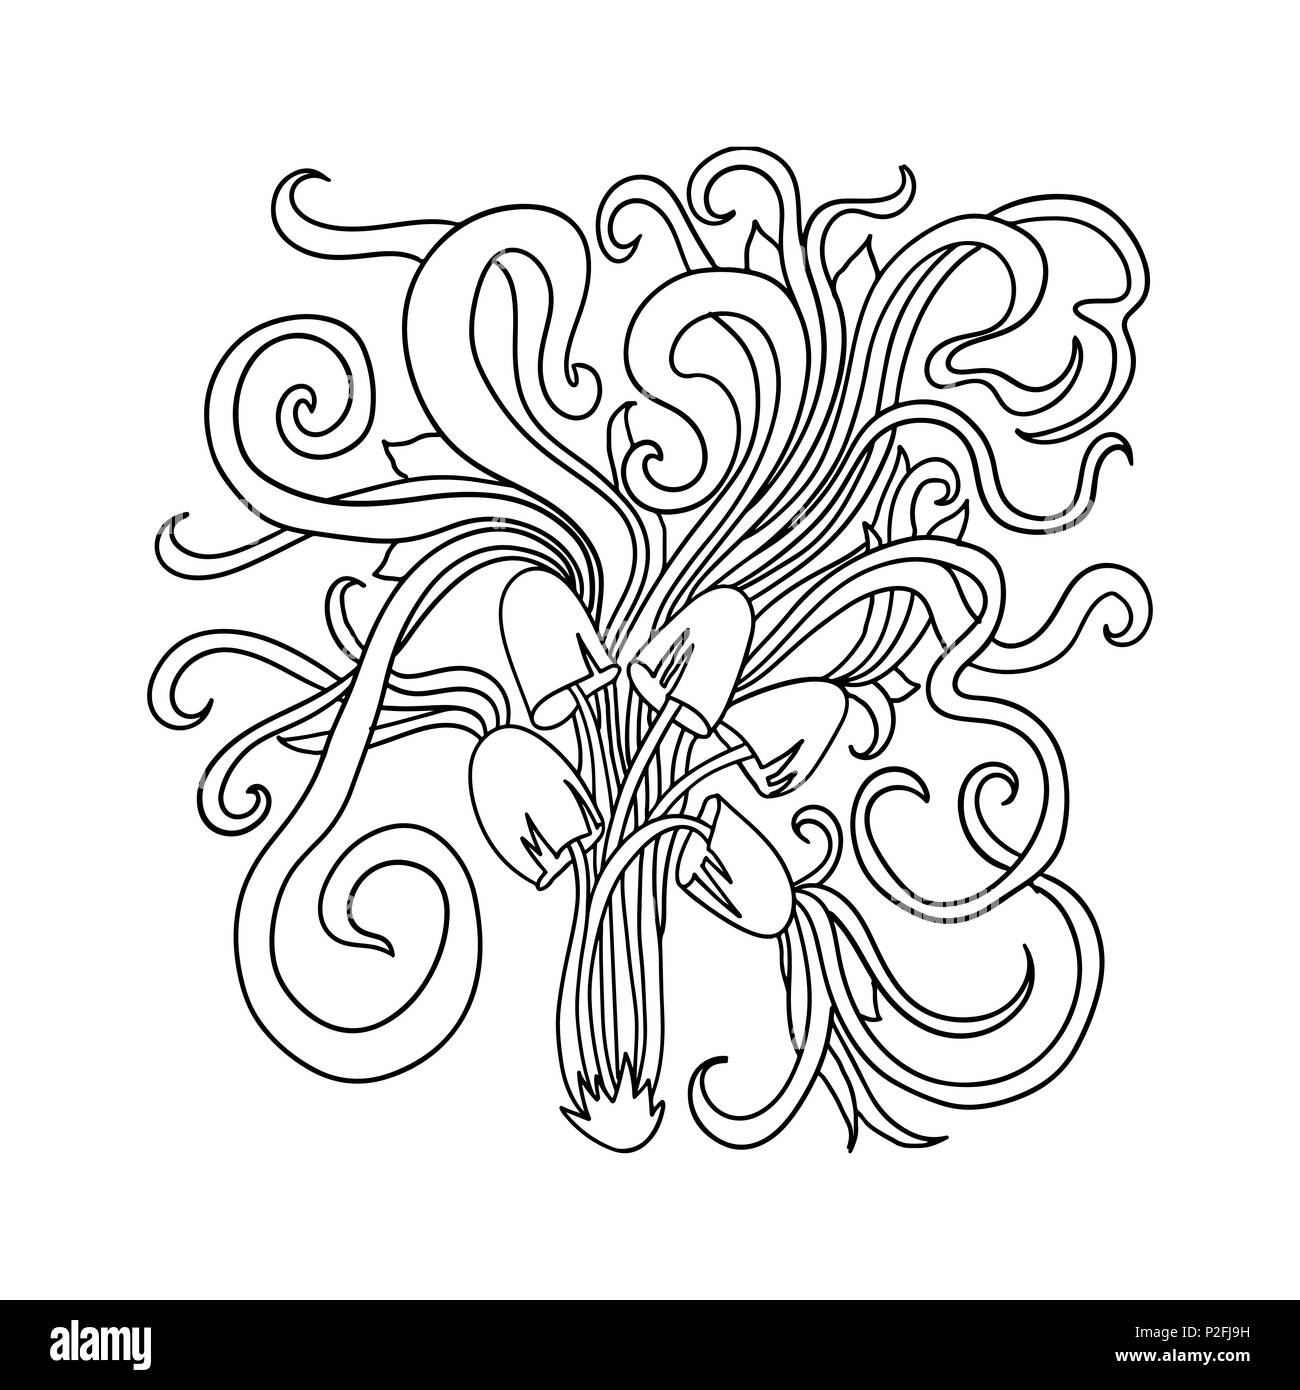 Magic mushrooms pattern. Psychedelic graphic poster. Vector black and white illustration. Stock Vector